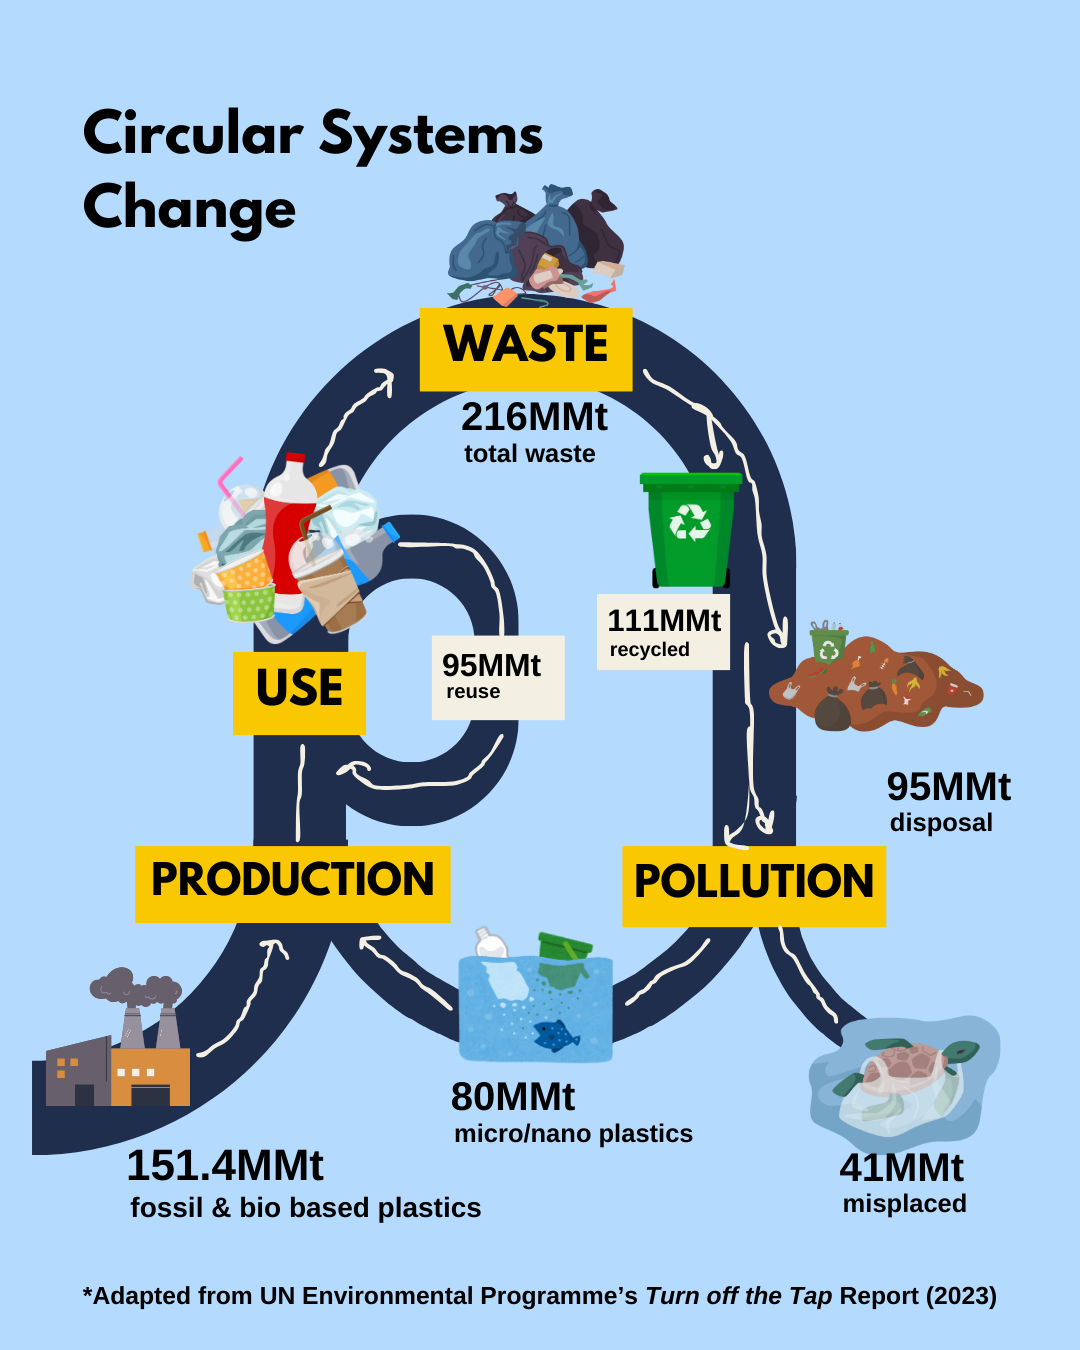 A diagram showing the plastic pollution cycle of waste through production, use, reuse, waste, disposal, and pollution with the circular systems change. 